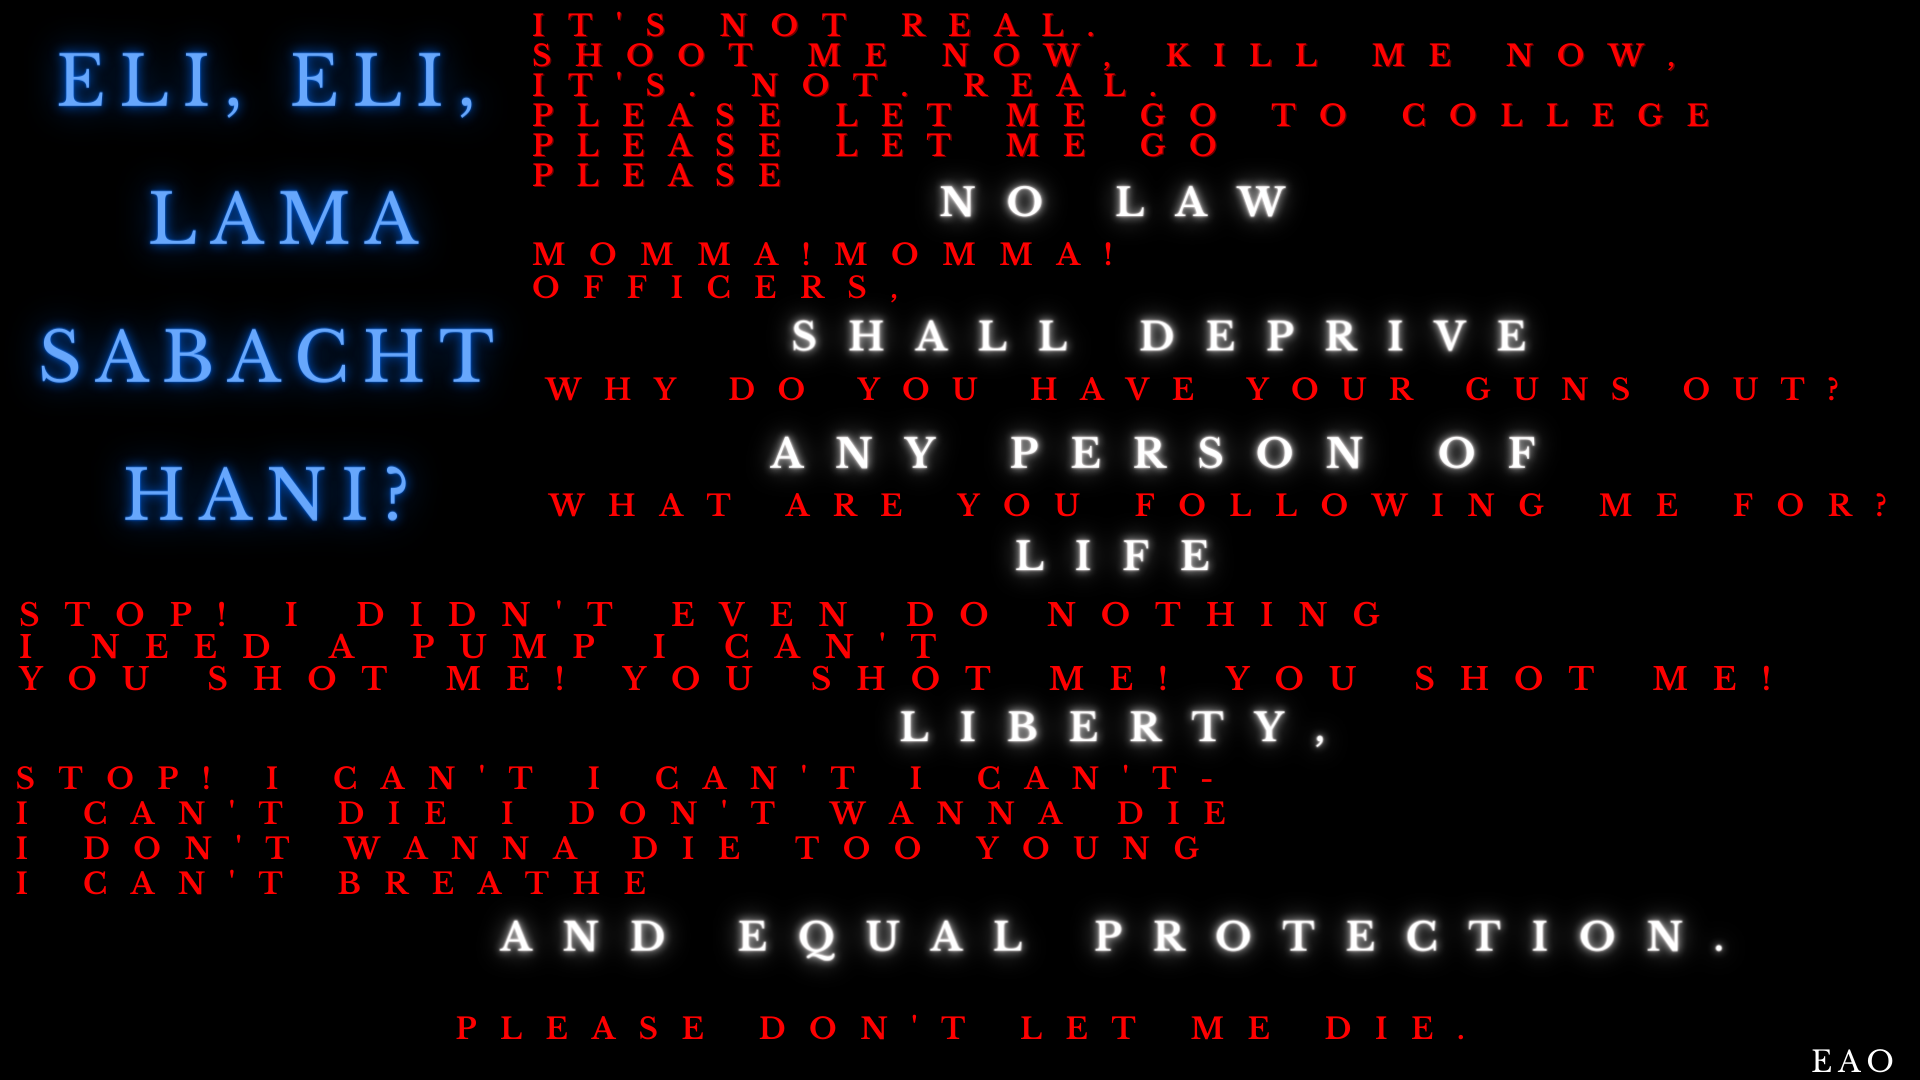 The poem "Forsaken" by Ebelechiyem Anuoluwatele Okafor shaped as an American flag. For the stars in the top left corner, the words "Eli, Eli lama sabacht hani?" are written. The red stripes are several victims of police brutality's last words. The white stripes are the words from the 14th amendment.